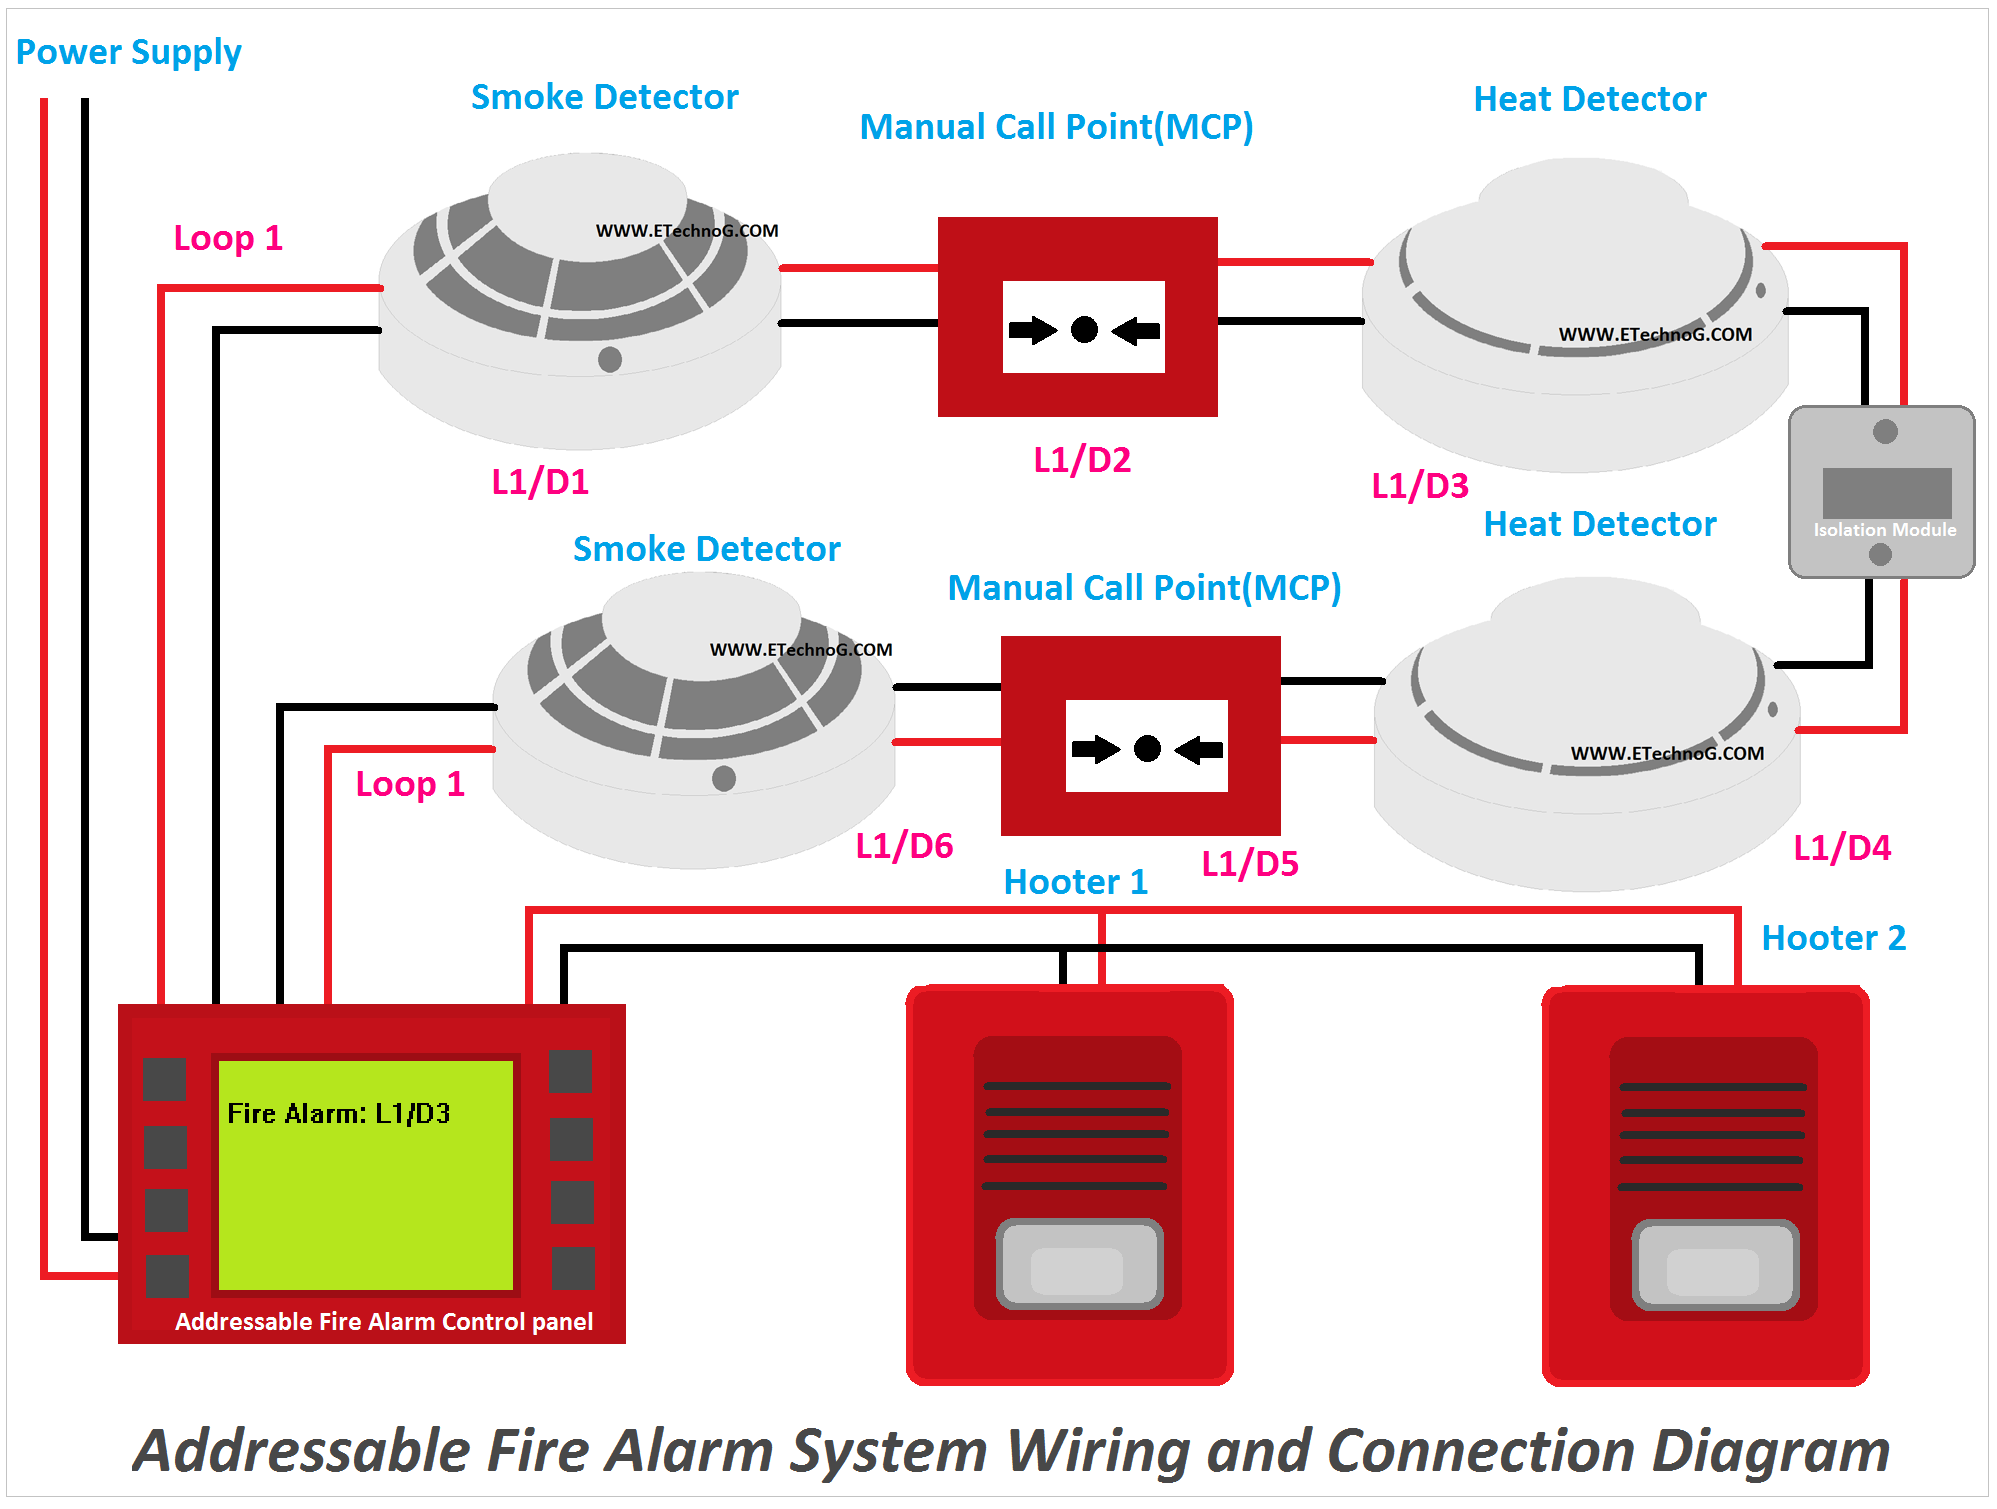 Addressable Fire Alarm System Wiring and Connection Diagram